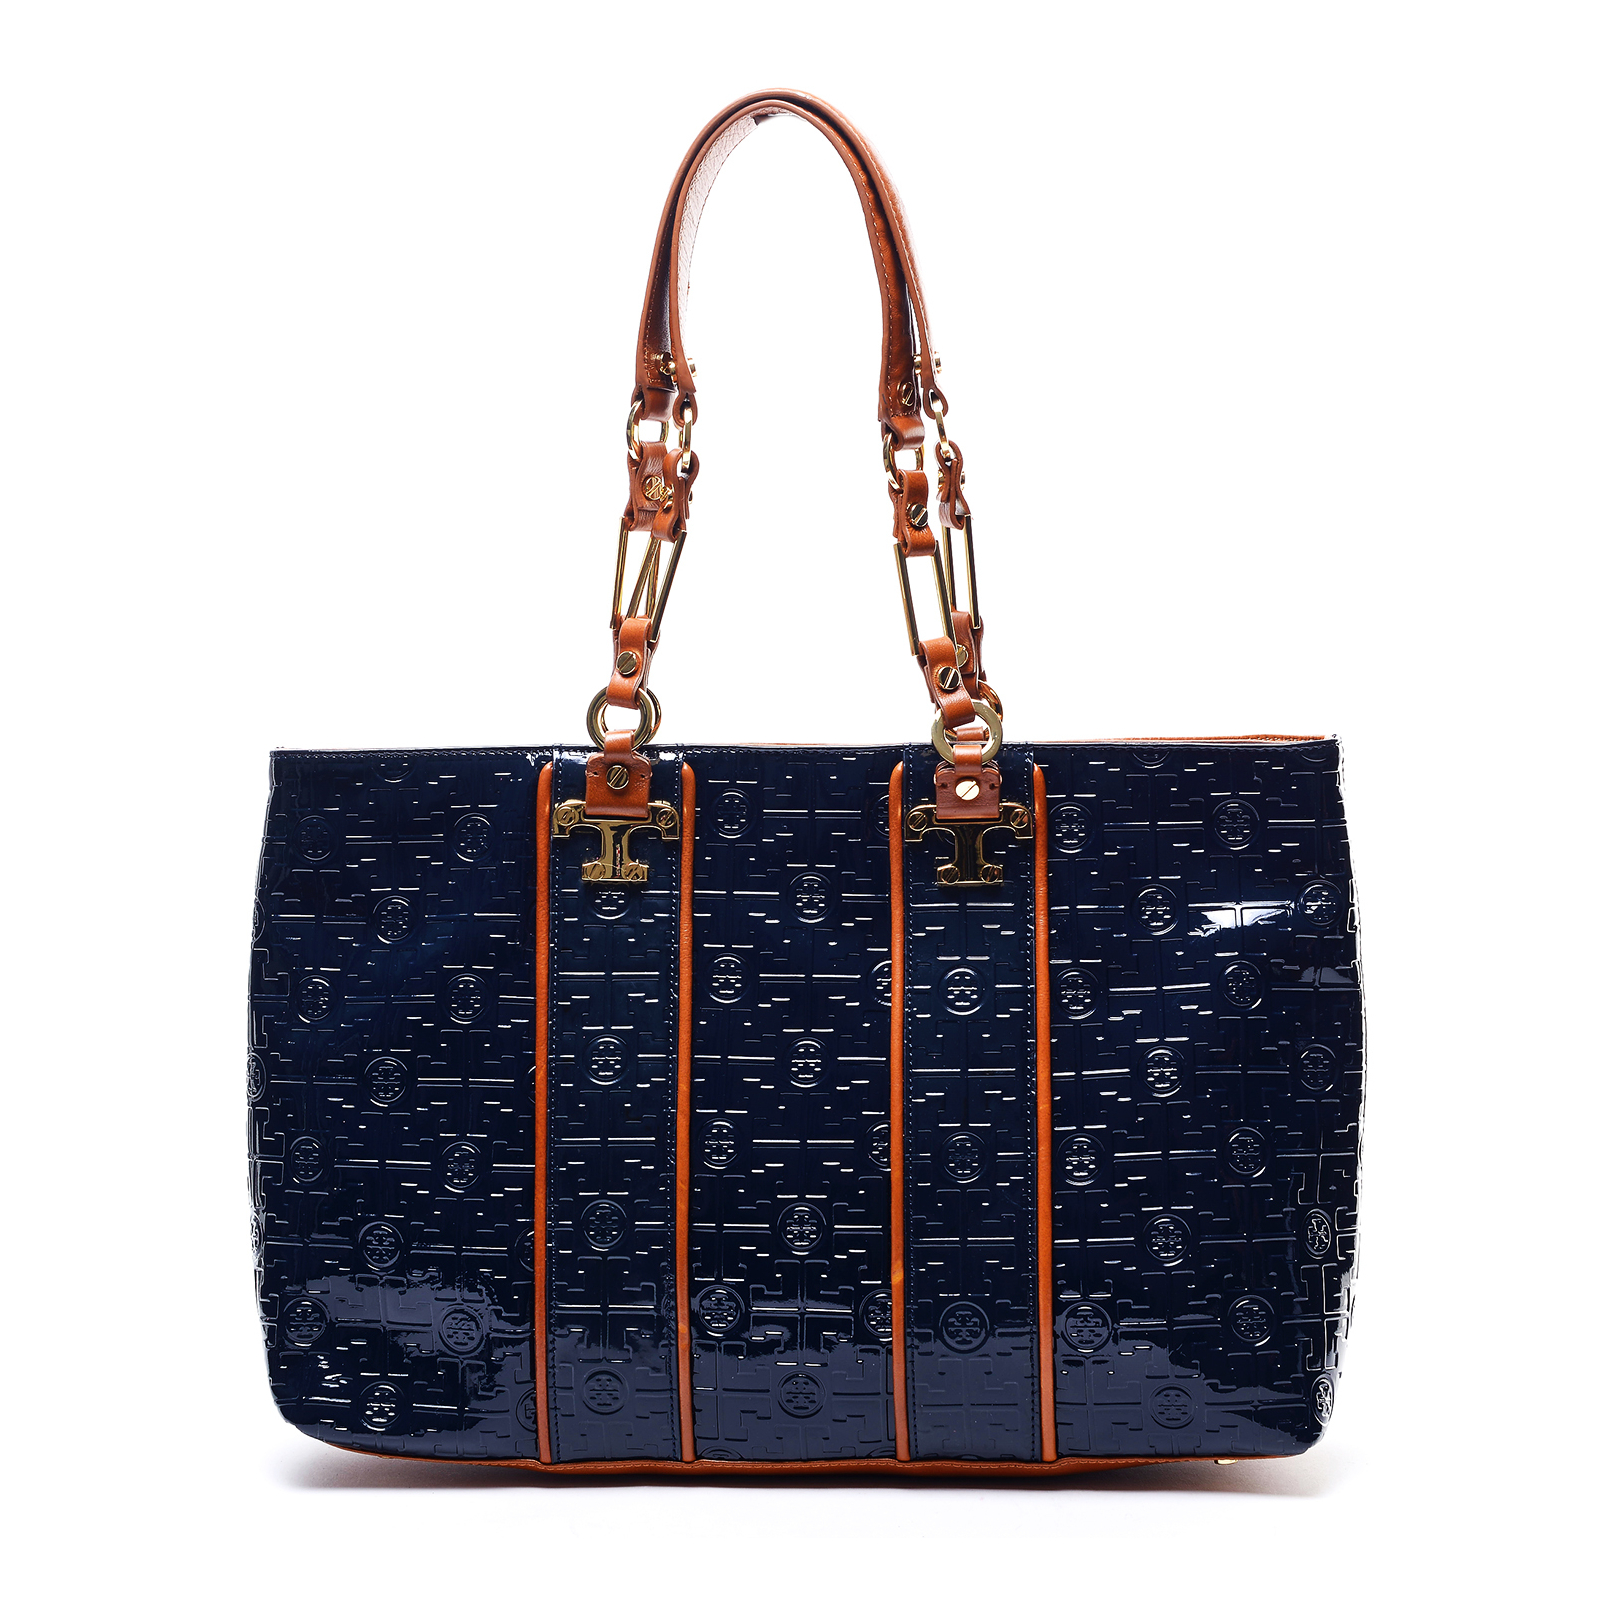 Tory Burch 'Nico Lux T' Embossed Patent Leather Tote